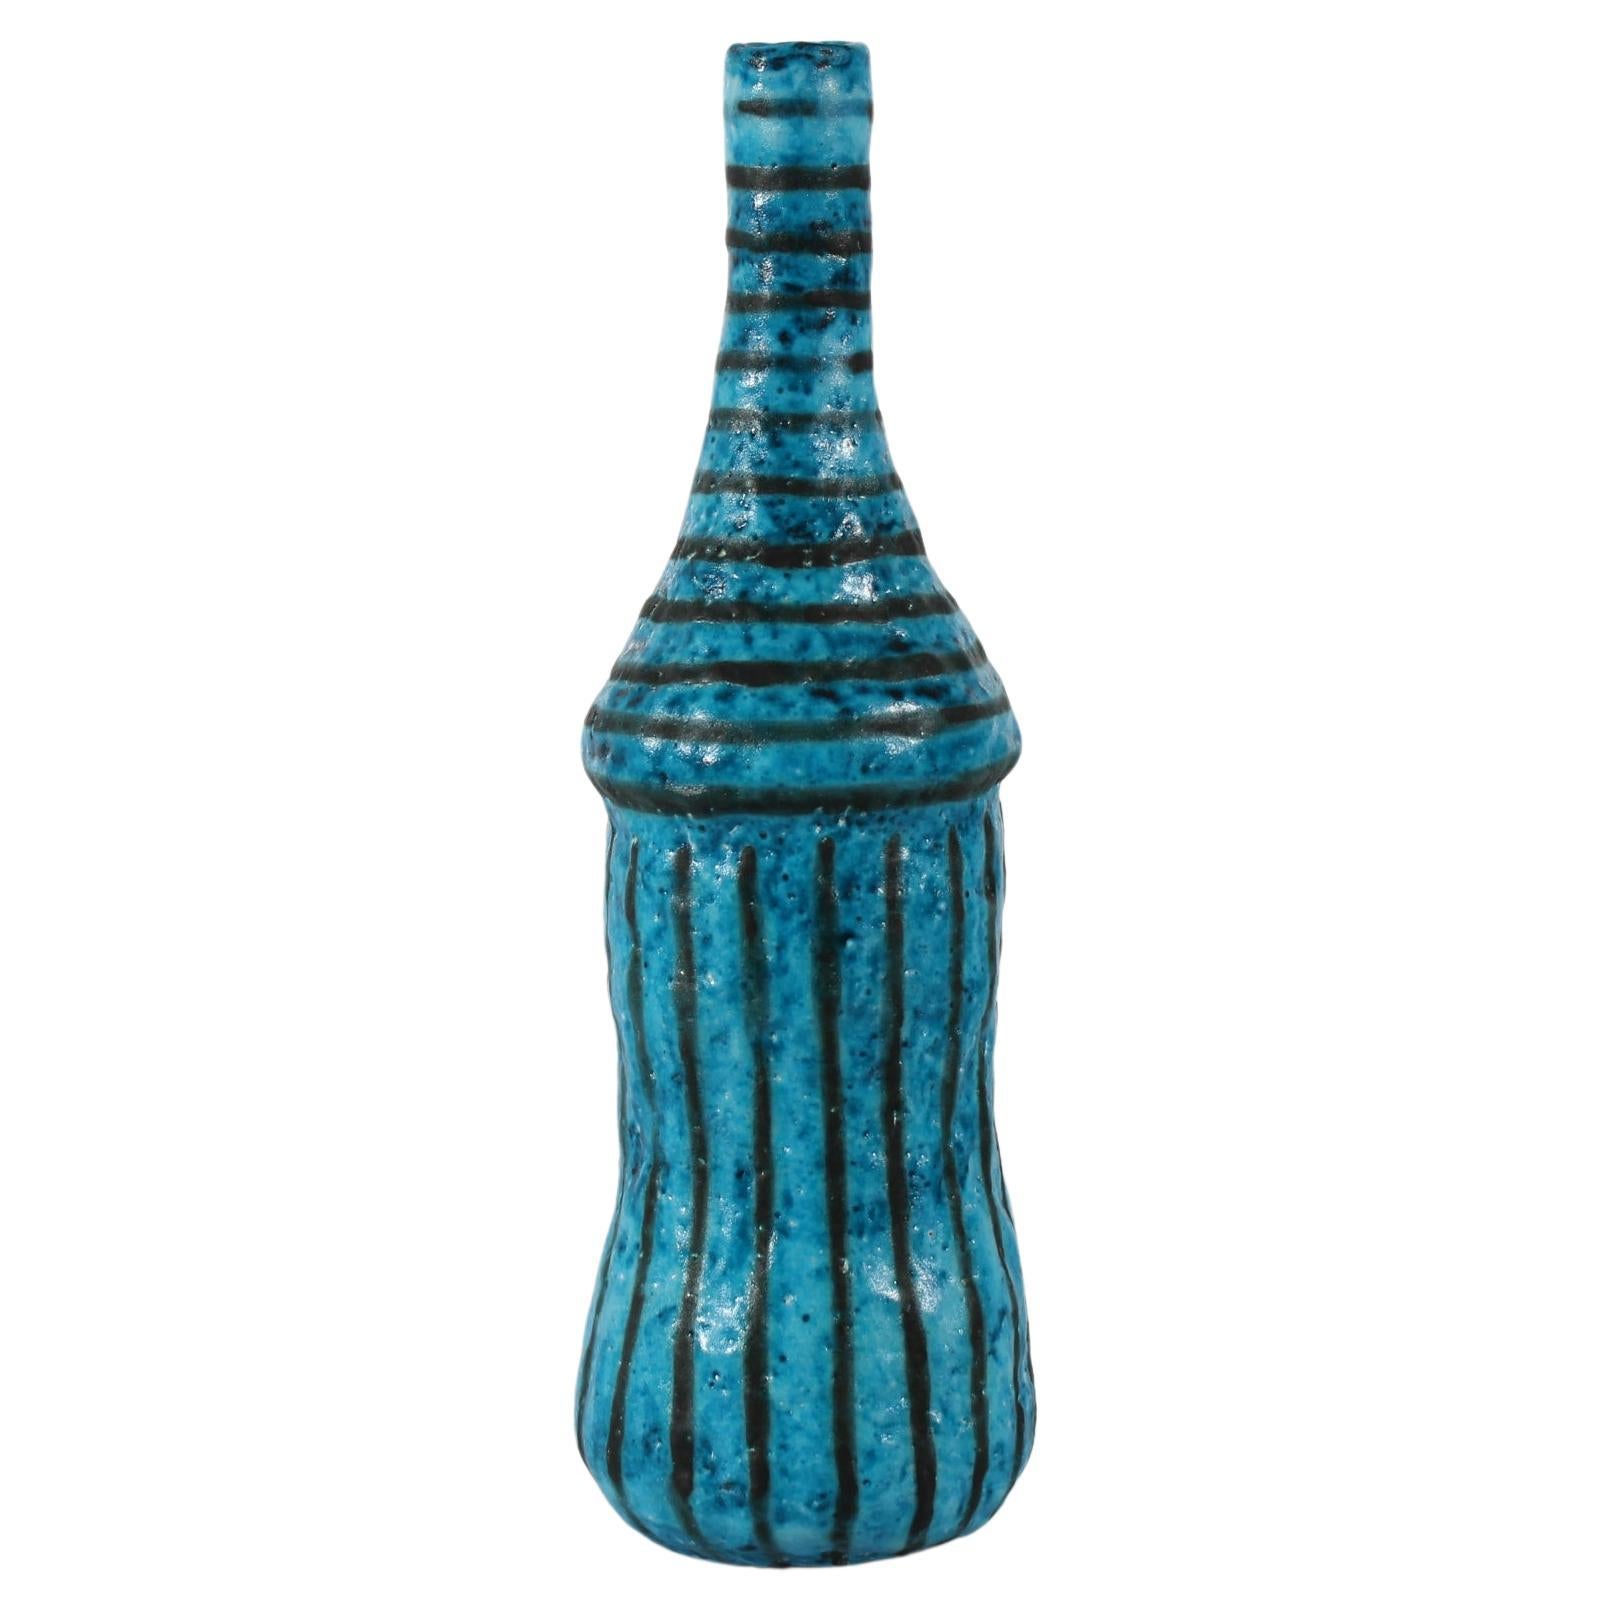 Guido Gambone Tall Artistic Bottle Vase Blue + Black Stripes Made in Italy 1950s